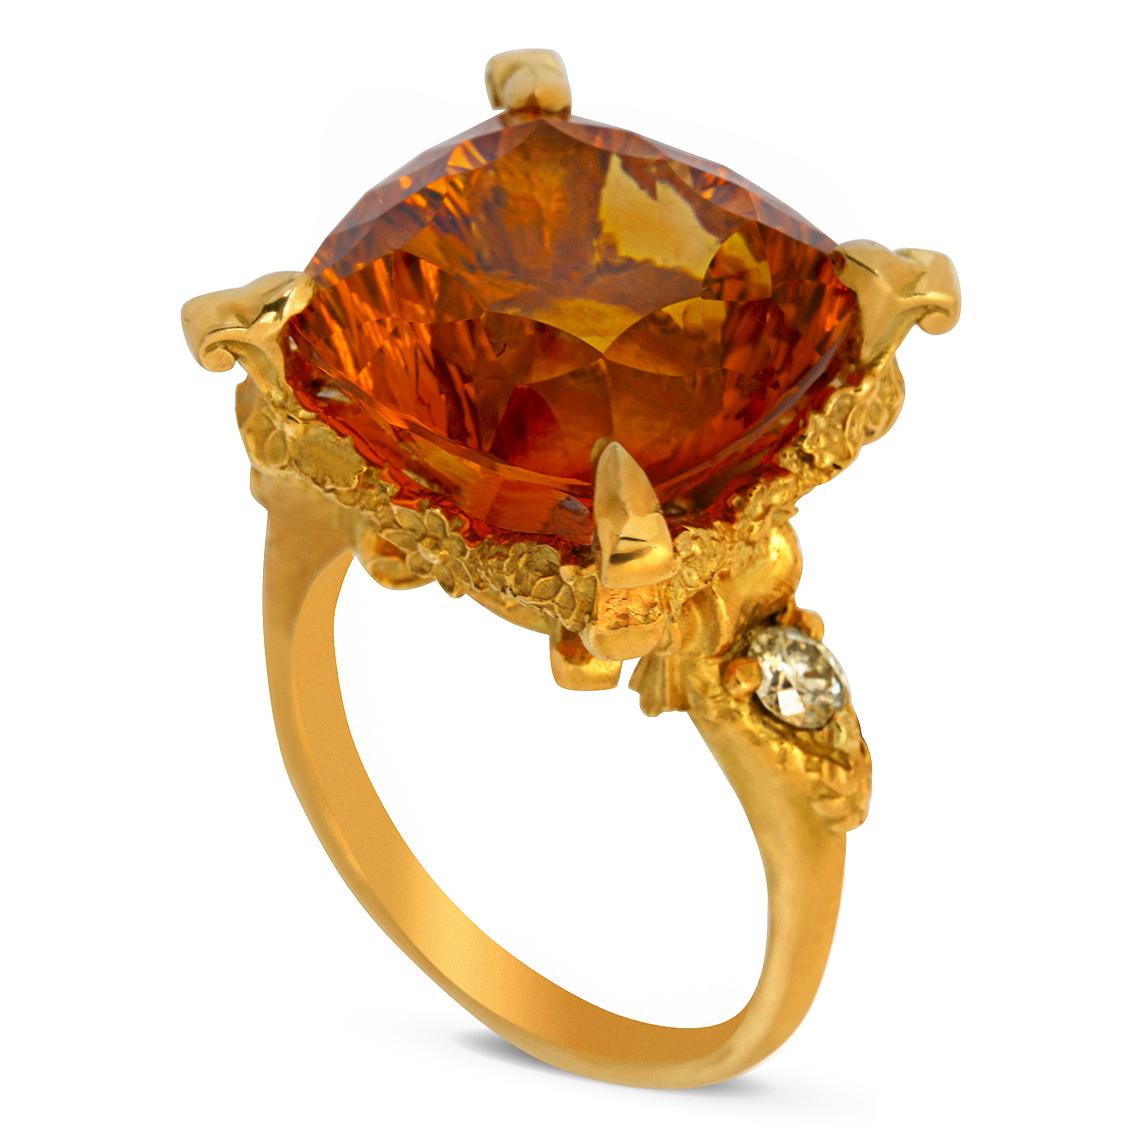 Handcrafted in 18kt yellow gold the Altar of Psyche Ring features a spectacular fiery central 14.81ct, 14.8mm x 14.8mm concave cut citrine aloft a signature William Llewellyn Griffiths garland setting flanked by two gorgeous 3.3mm diameter round